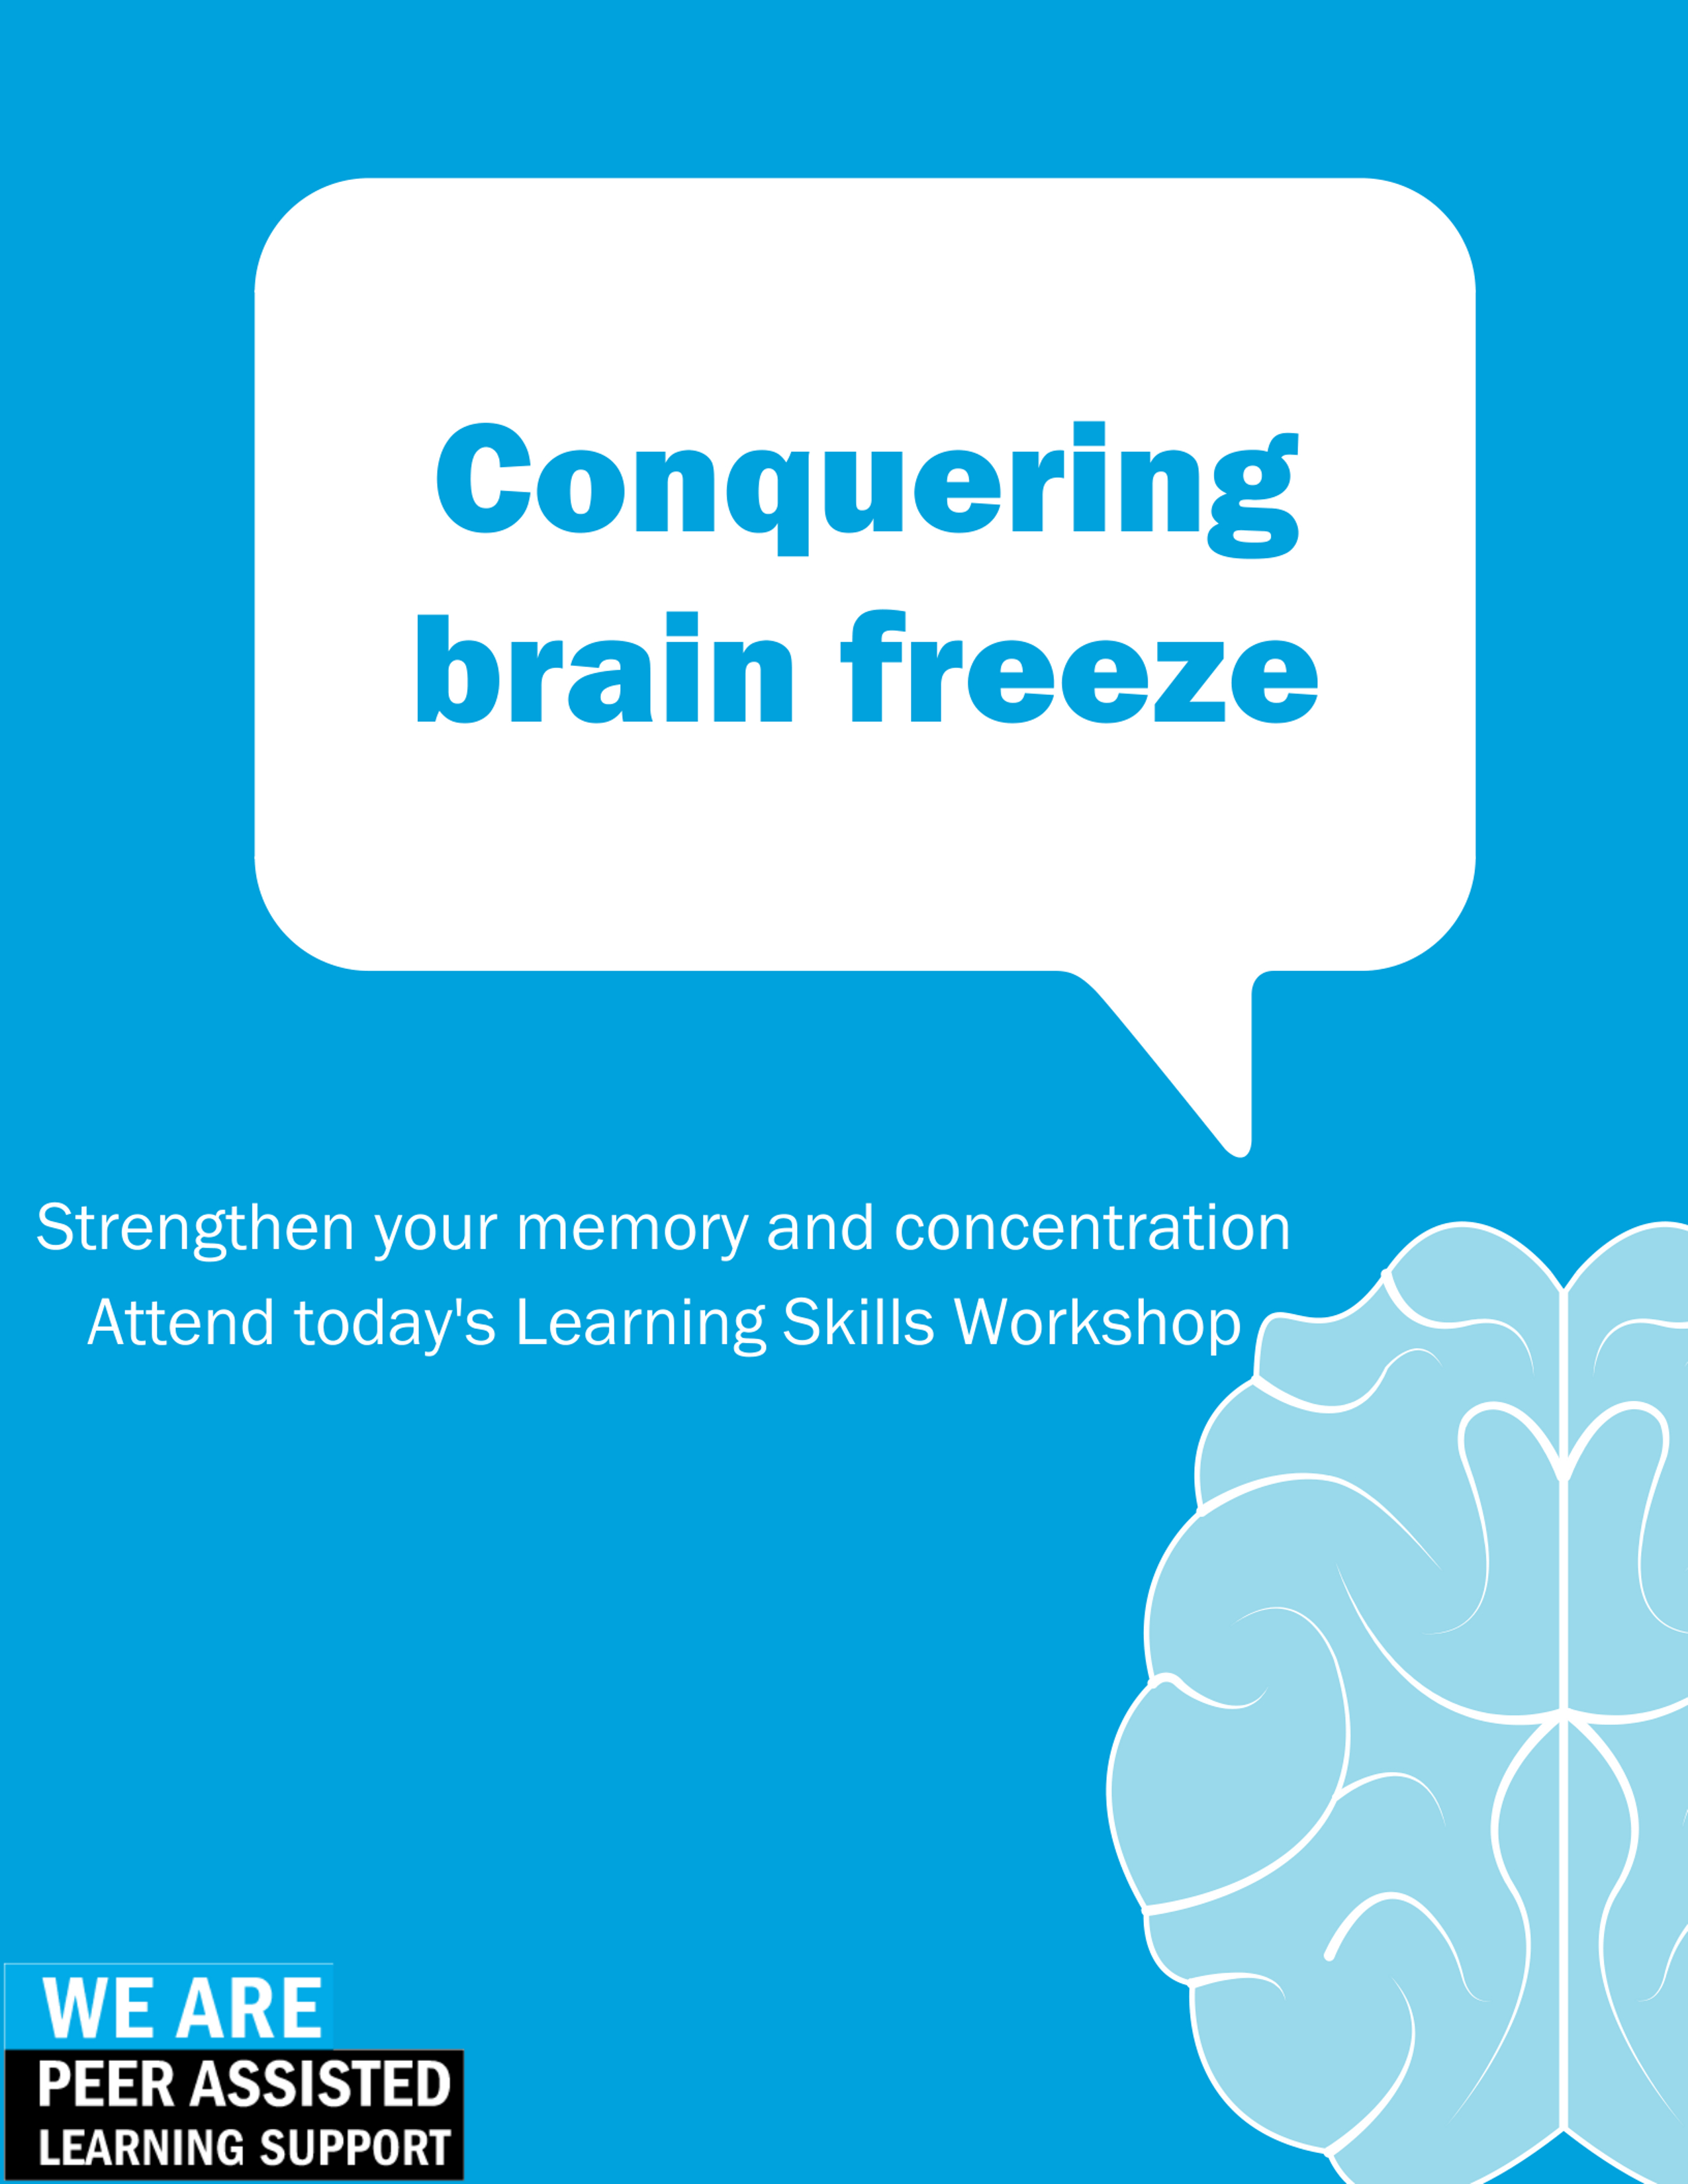 An image of a brain on a bright blue background. Background text “Conquering brain freeze. Strengthen your memory and concentrat